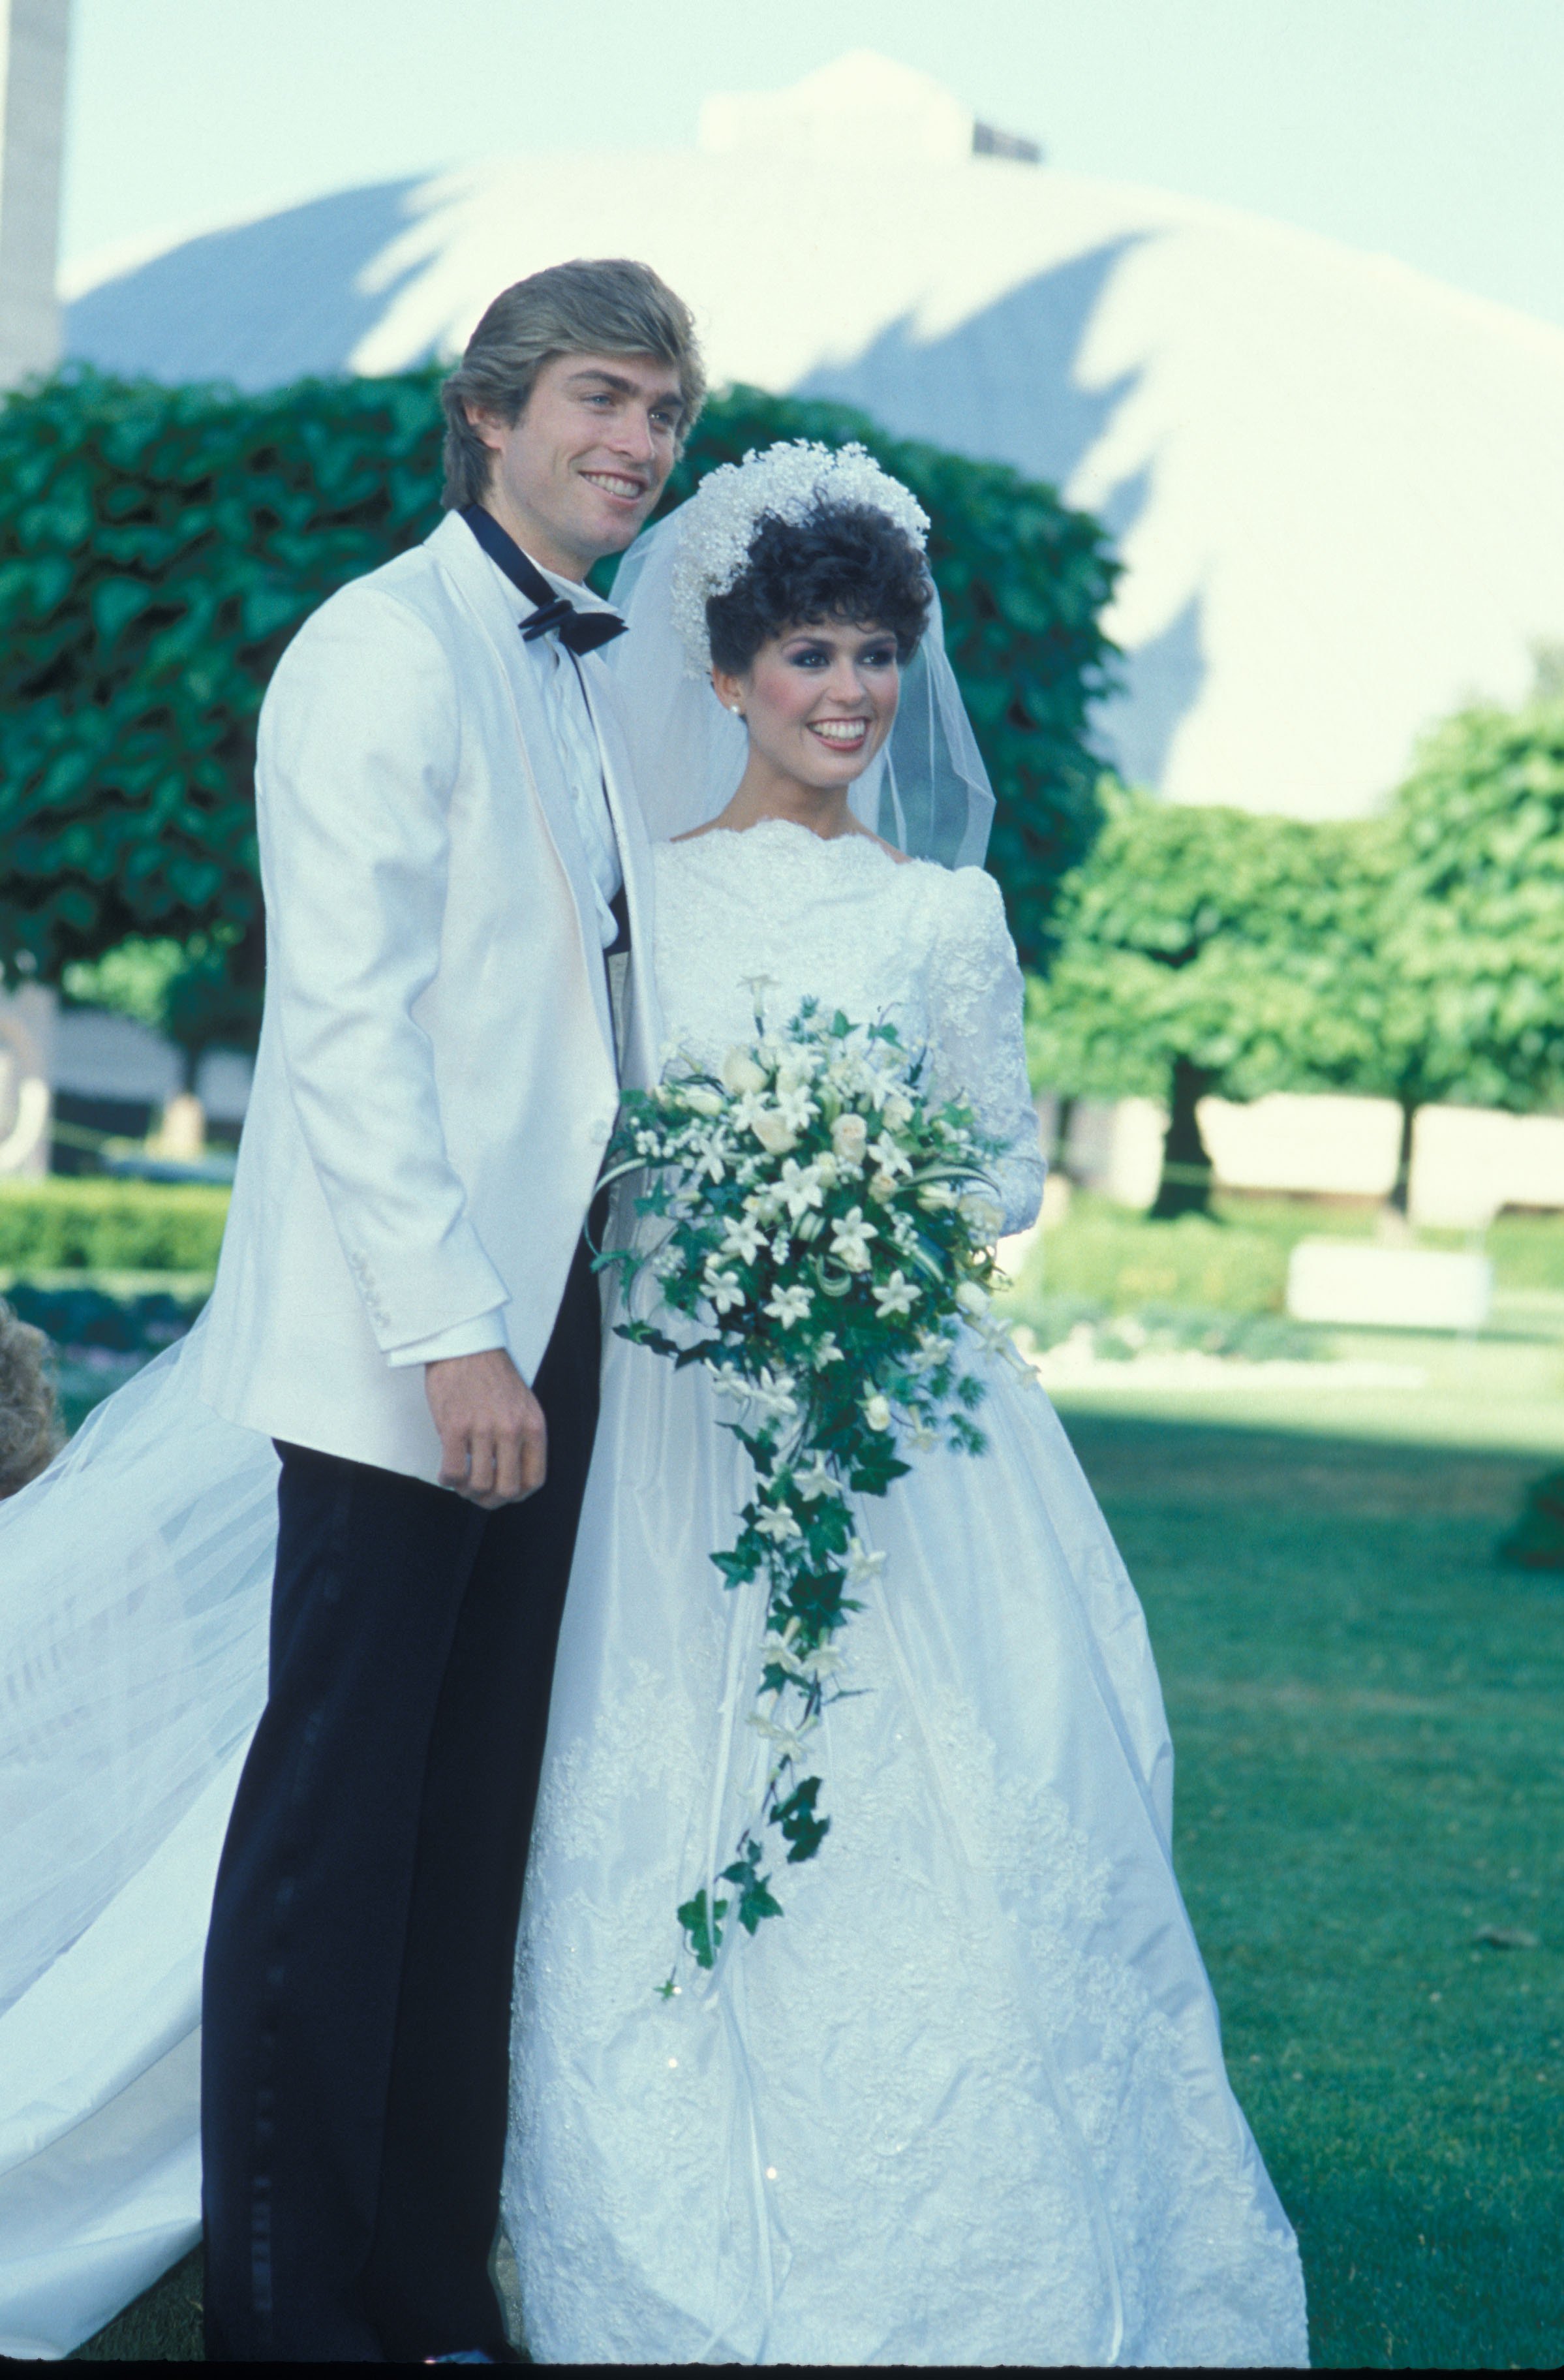 Singer Marie Osmond and actor Stephen Lyle Craig at their first wedding in June 26, 1982 in Salt Lake City | Source: Getty Images